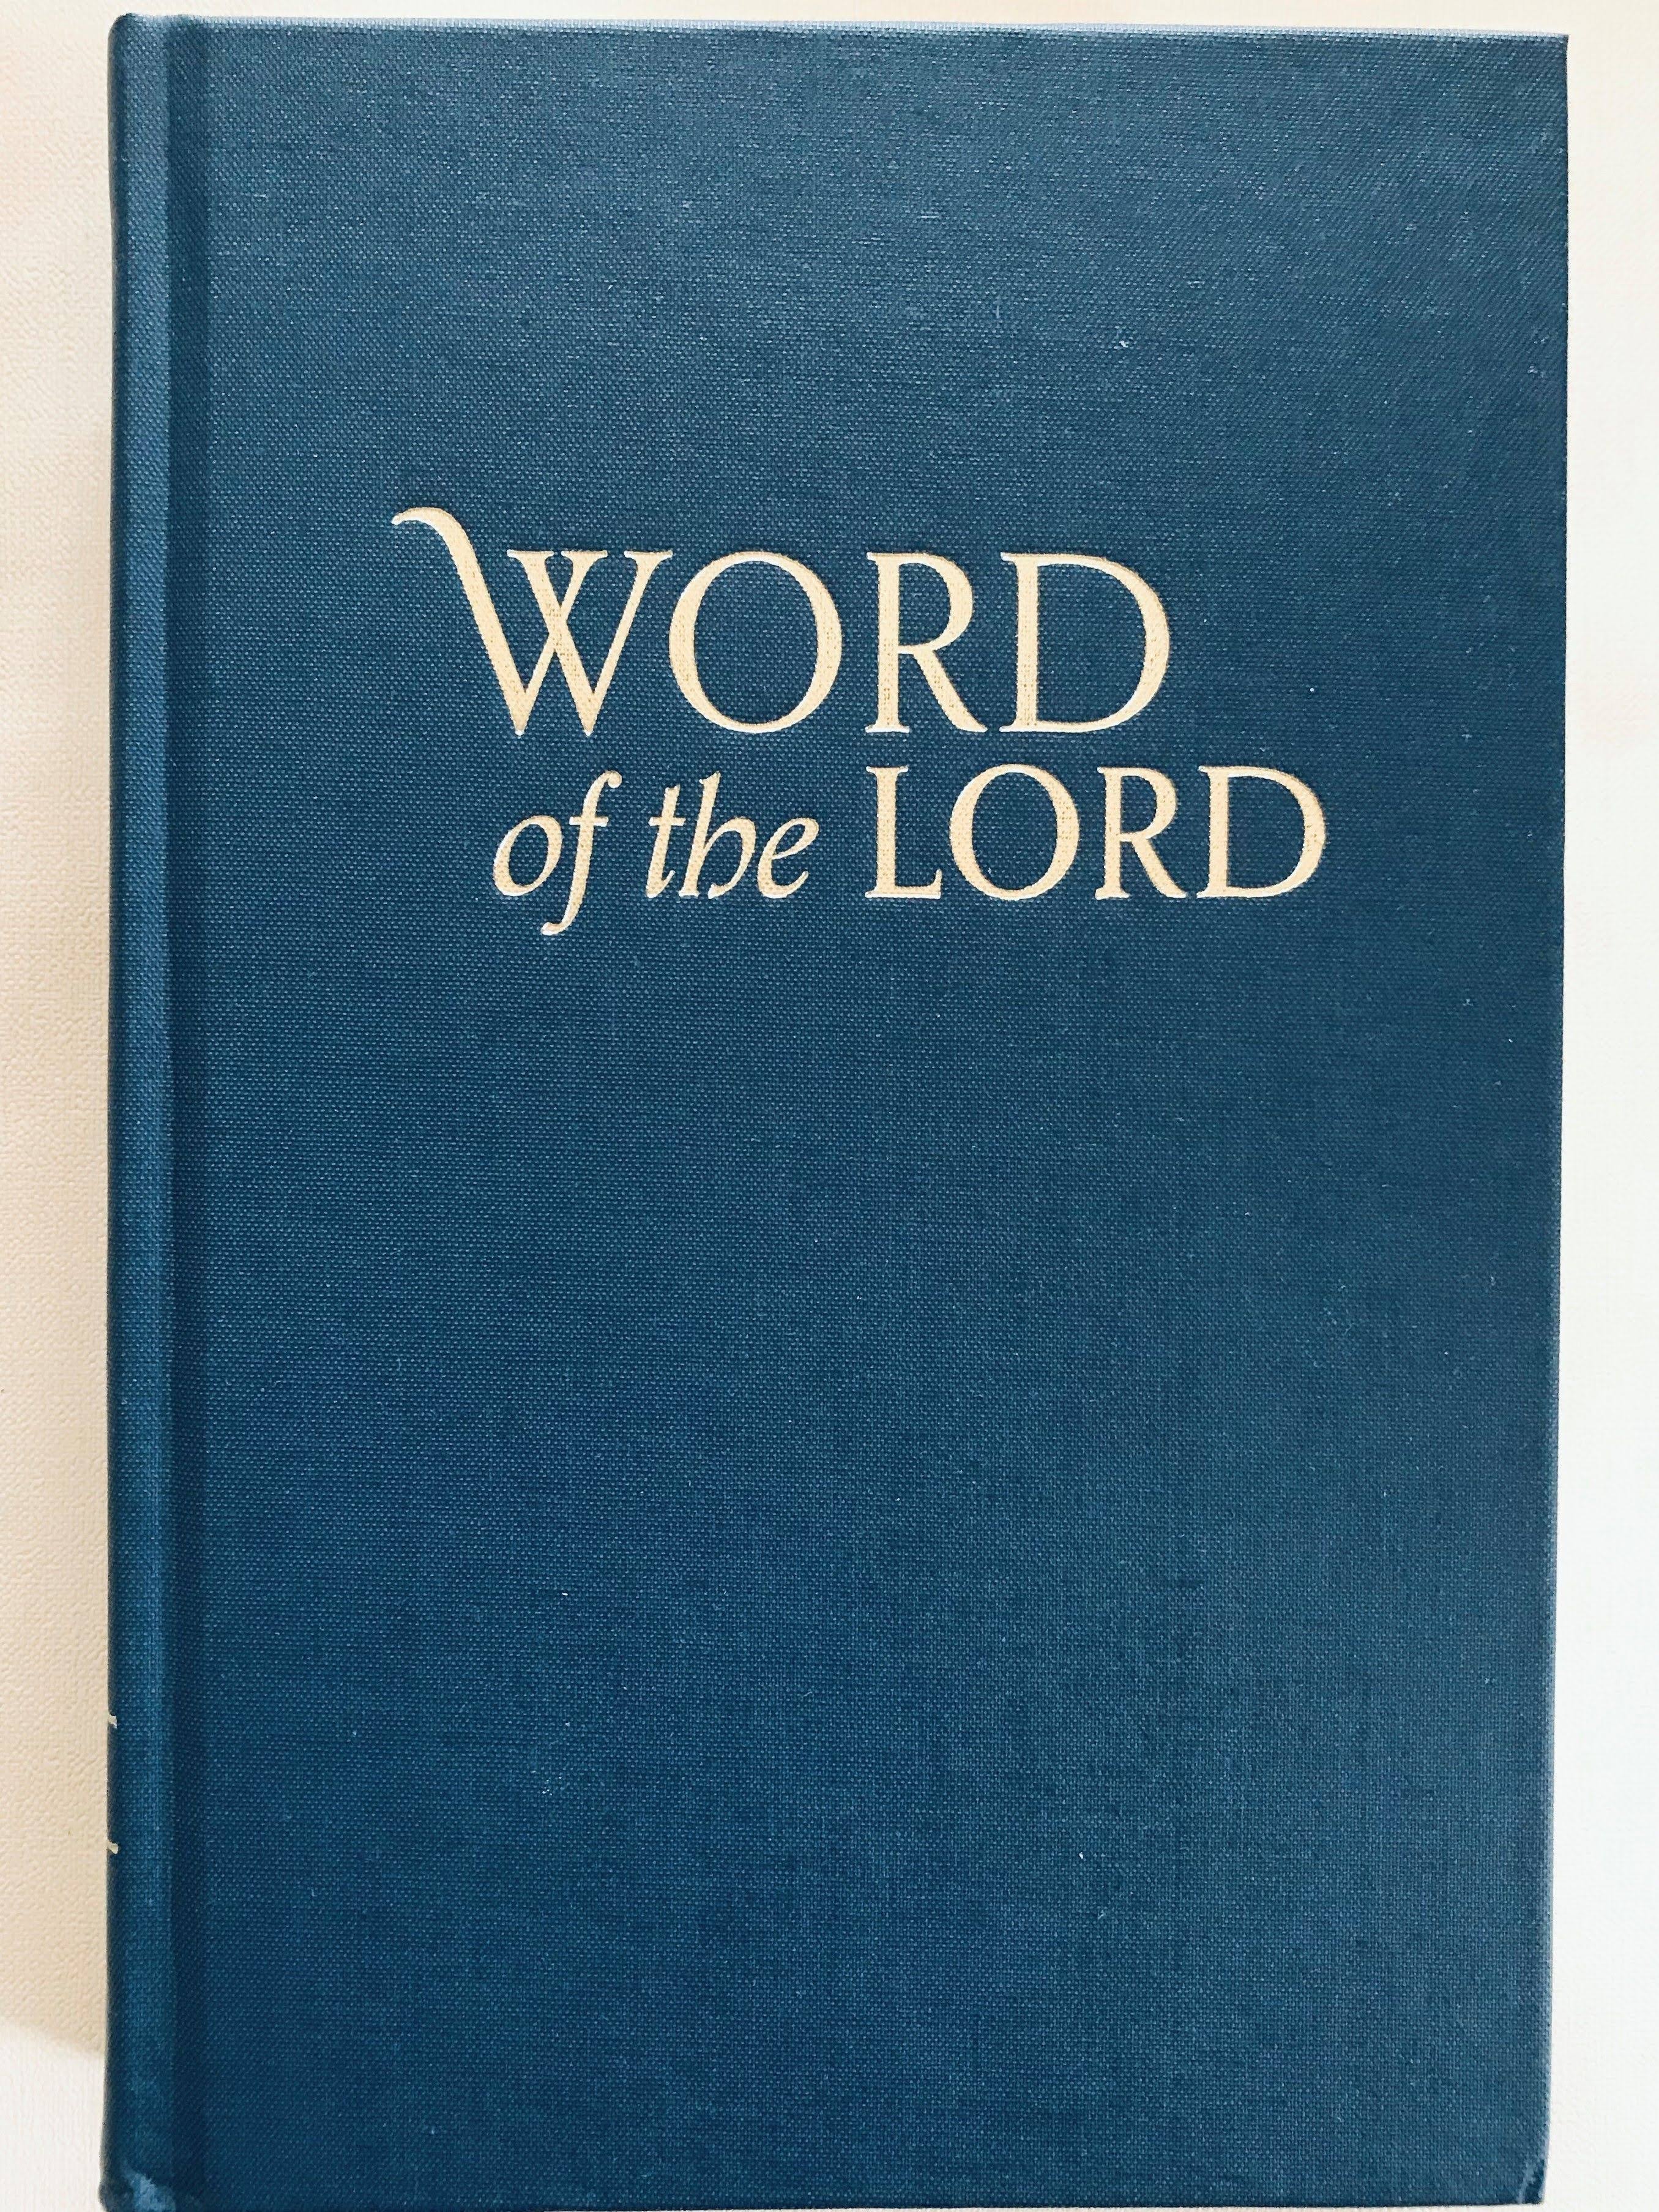 Word of the Lord [Book]